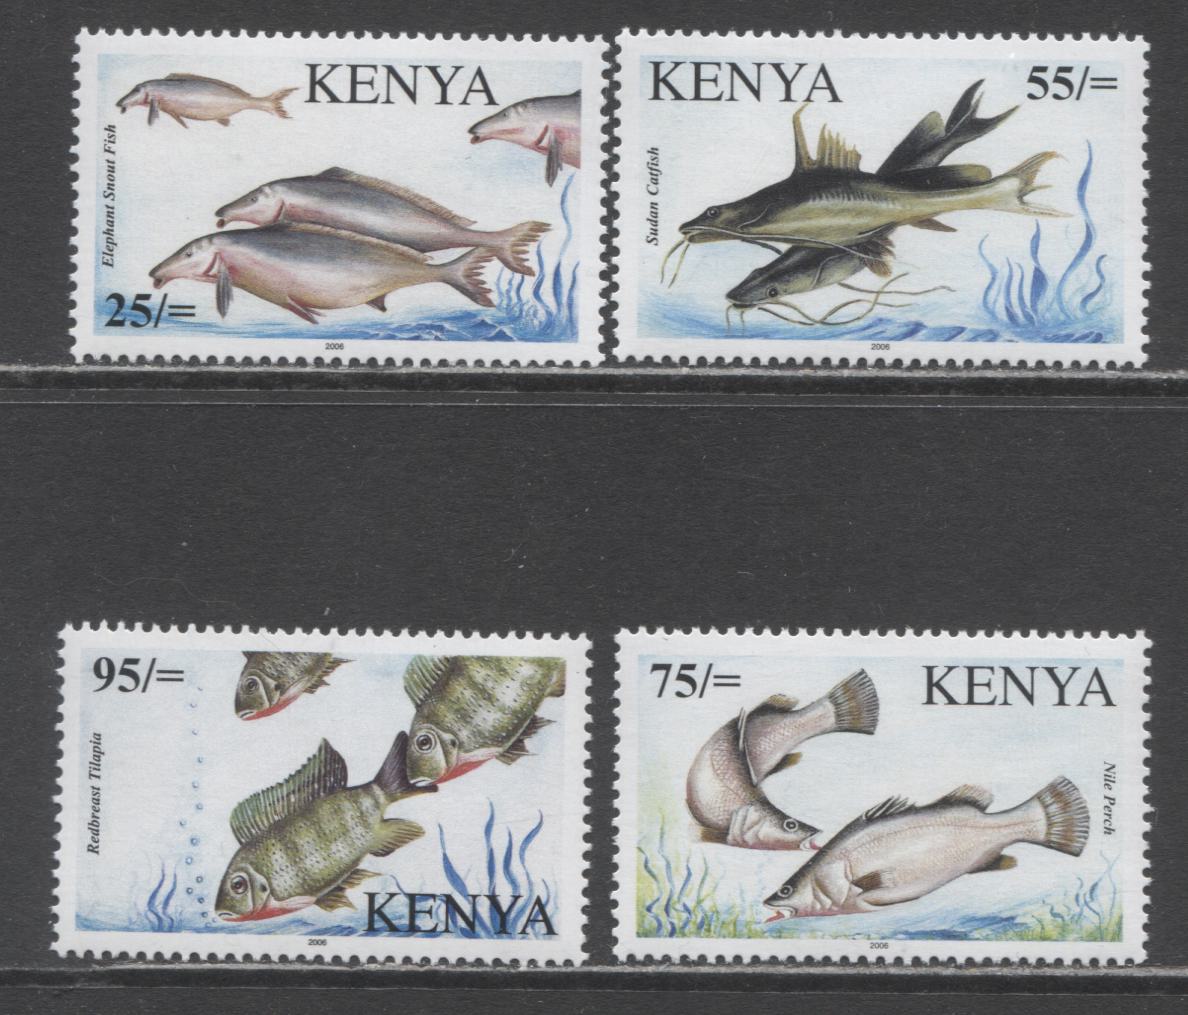 Lot 55 Kenya SC#789-792 2006 Fish Issue, Scarce, 4 VFNH Singles, Click on Listing to See ALL Pictures, 2017 Scott Cat. $200